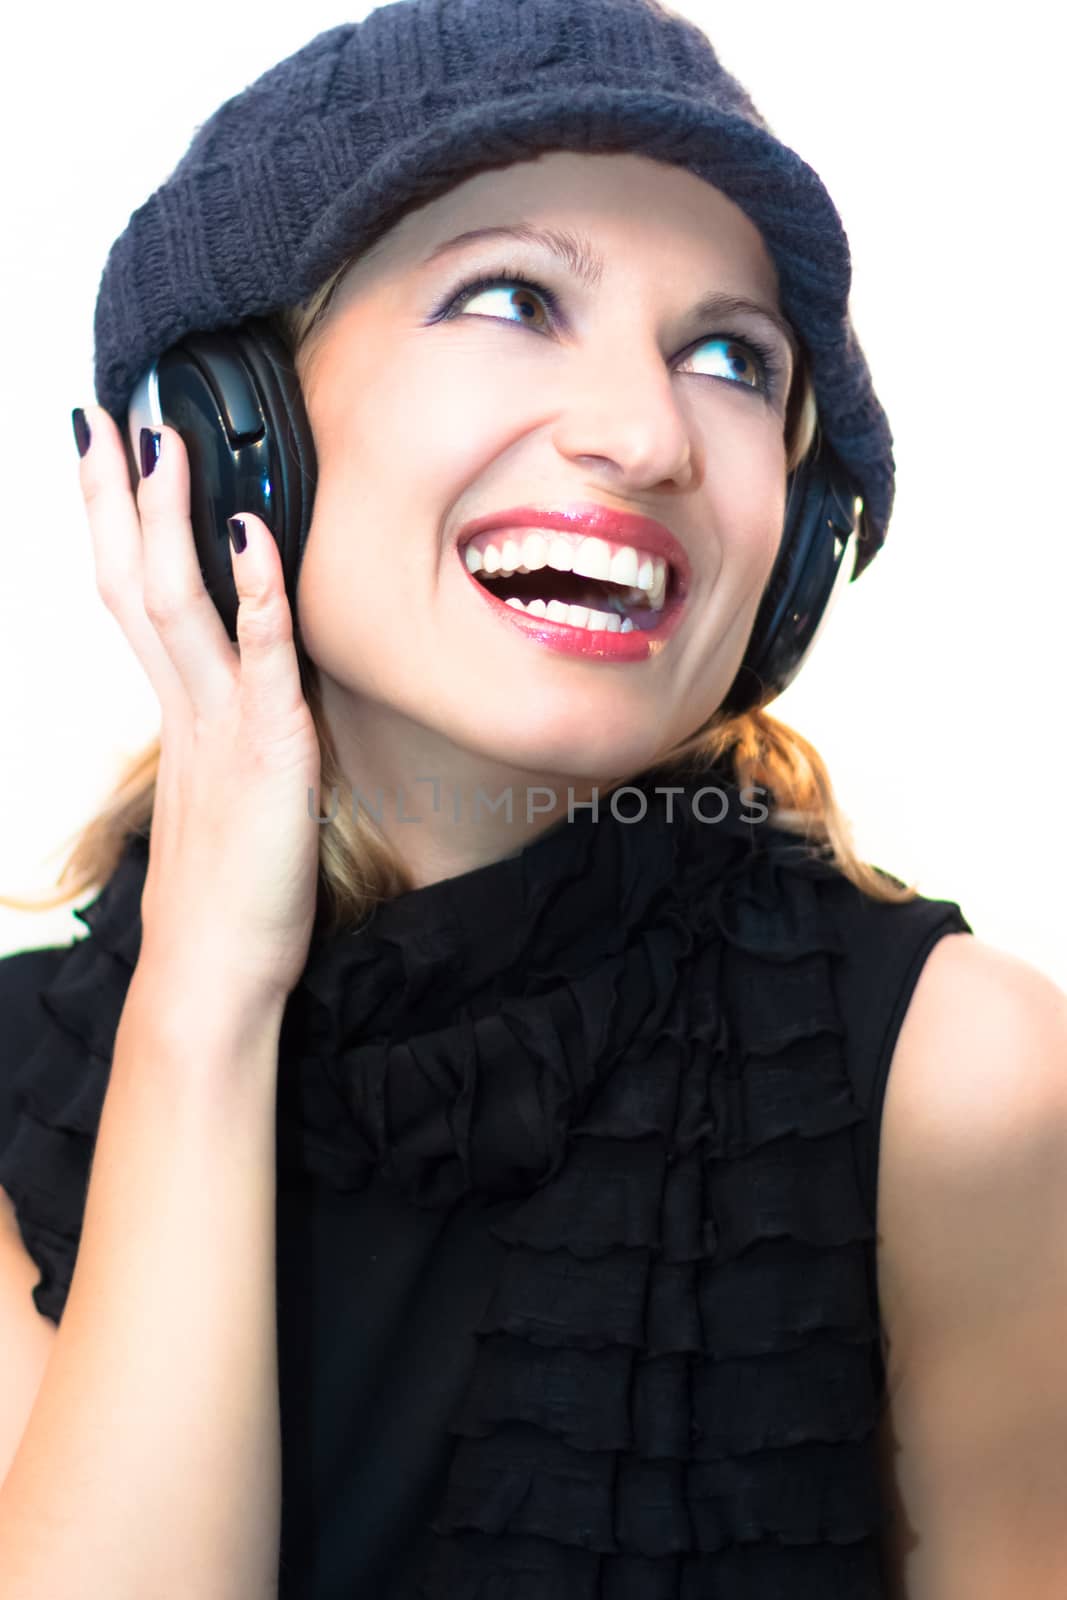 Blonde caucasian girl listening to the music with a pair of headphones